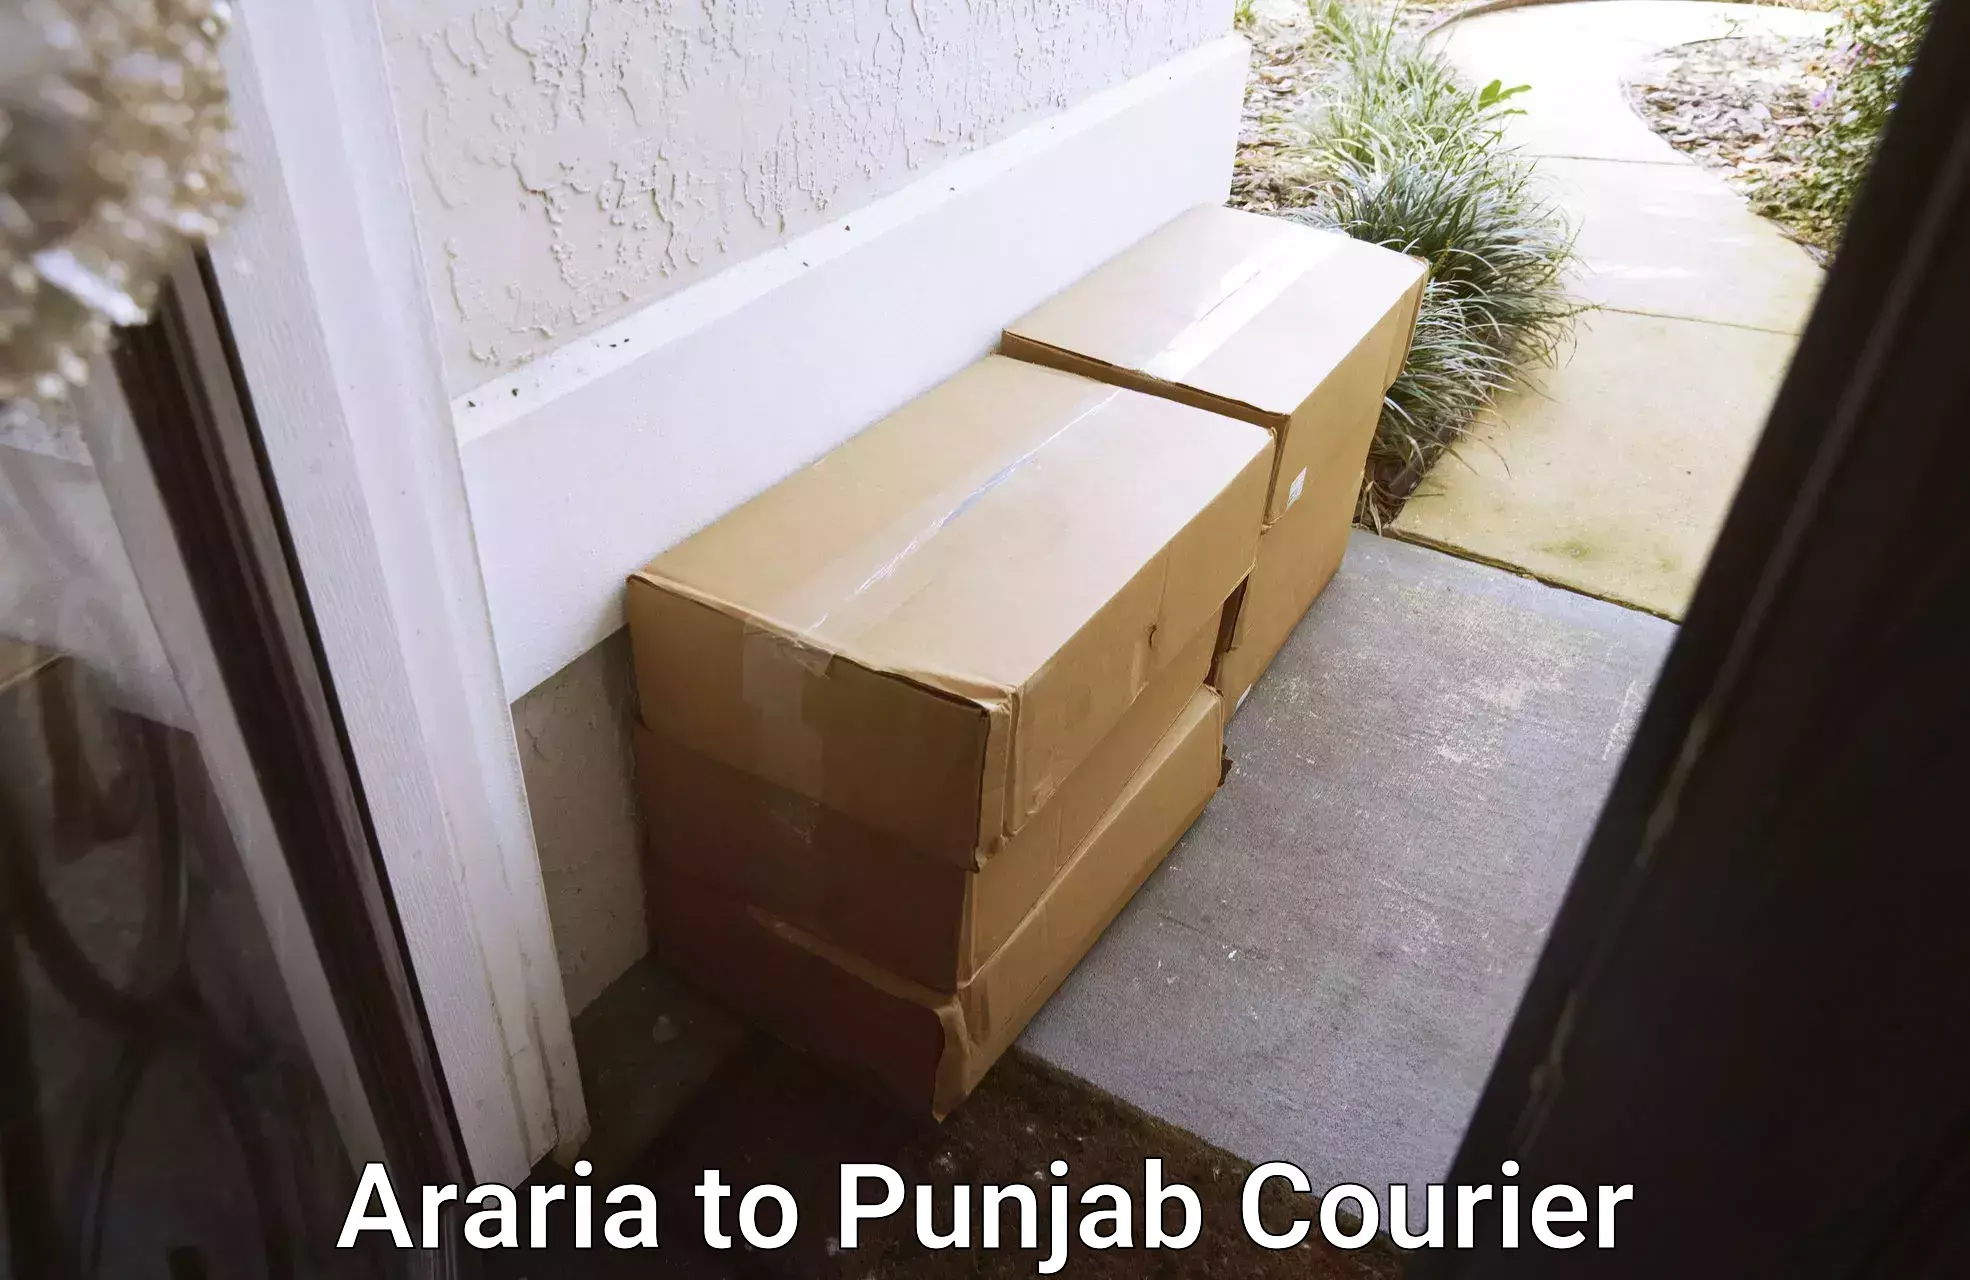 Furniture moving experts Araria to Pathankot